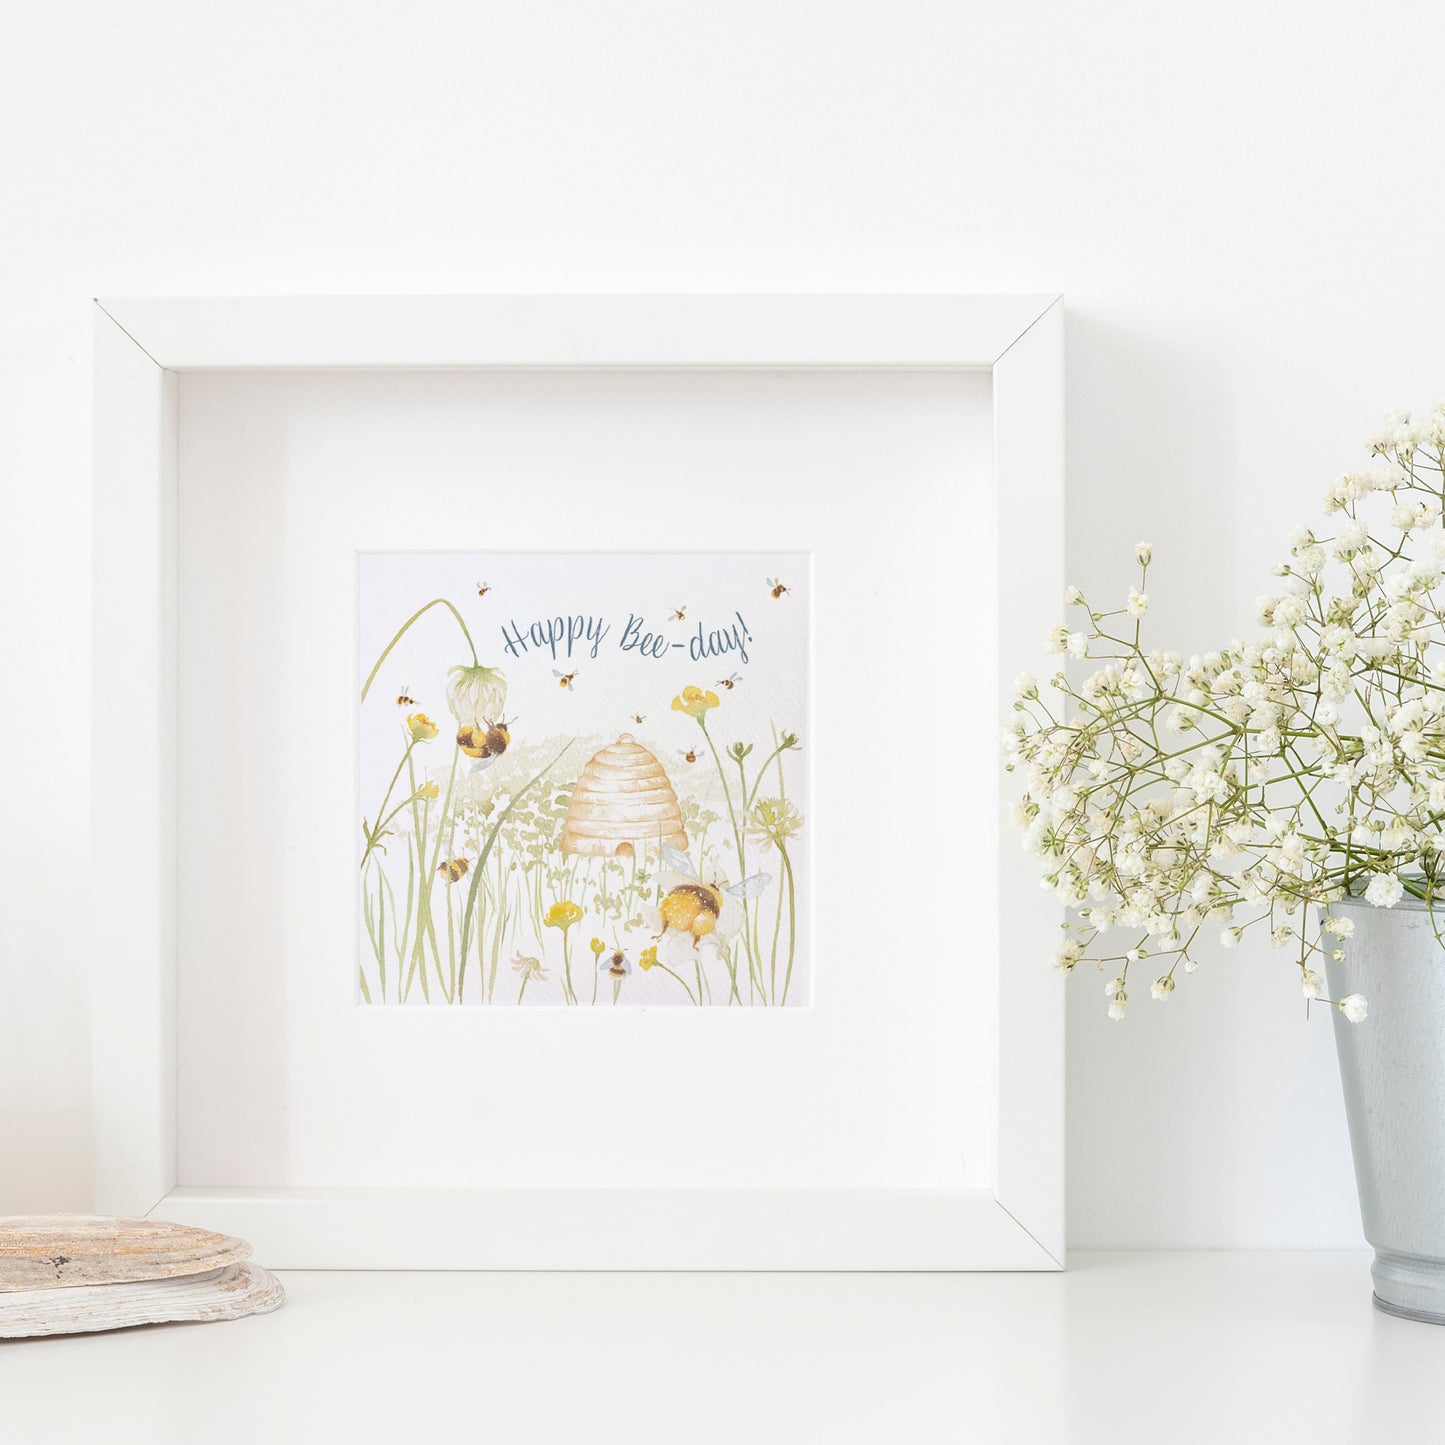 A greetings card displayed as an art print in a white frame propped up on a shelf next to a plant. The card reads Happy Bee-day in dark blue text above a buttercup meadow full of bees around a traditional bee hive in a watercolour style.